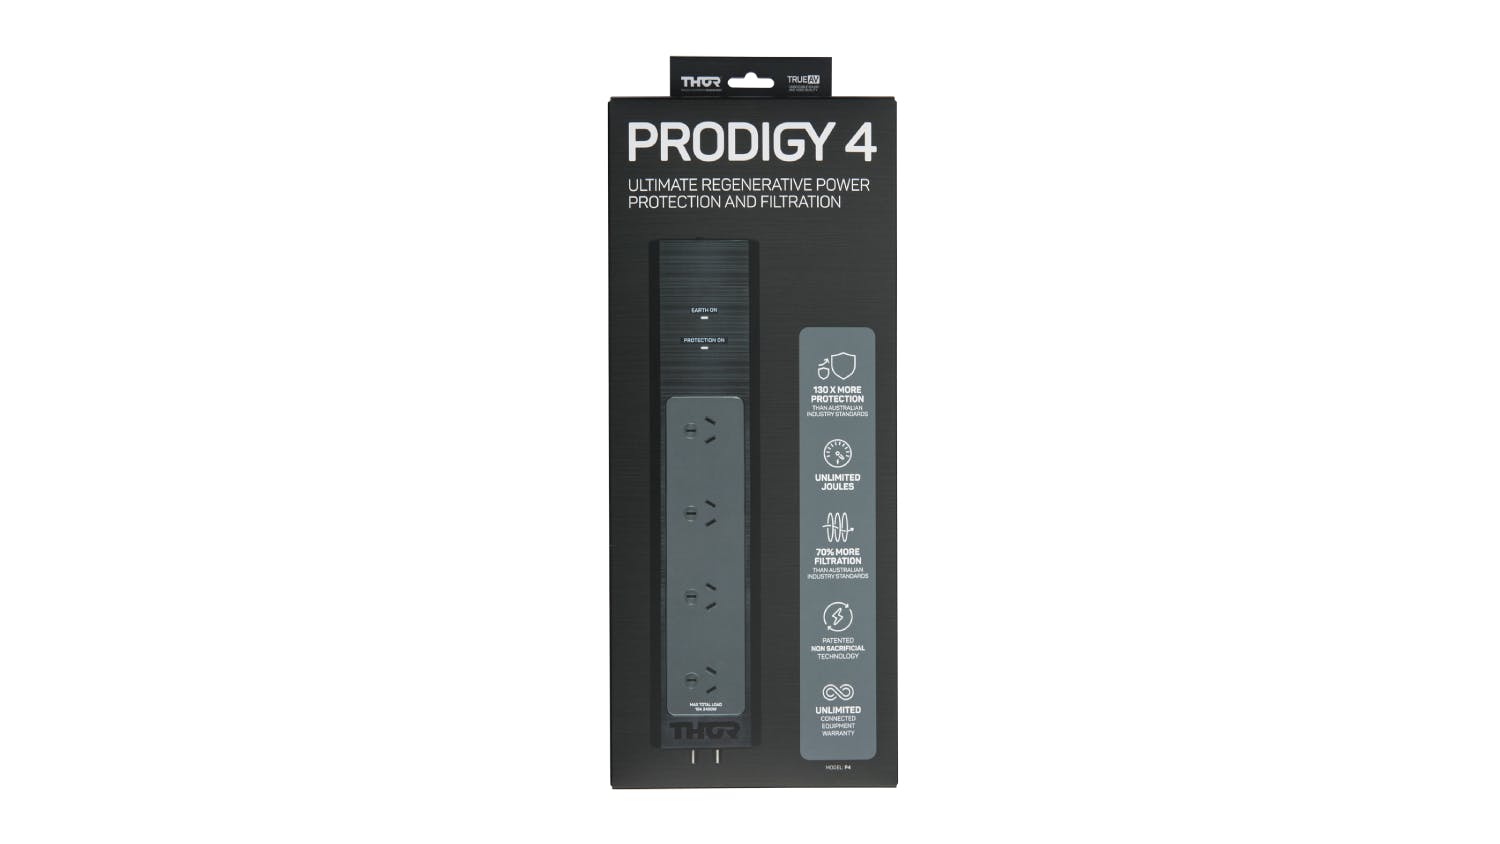 Thor PRODIGY 4 Power Filter & Surge Protector with Fireproof MOV - 4 Outlets (P4)